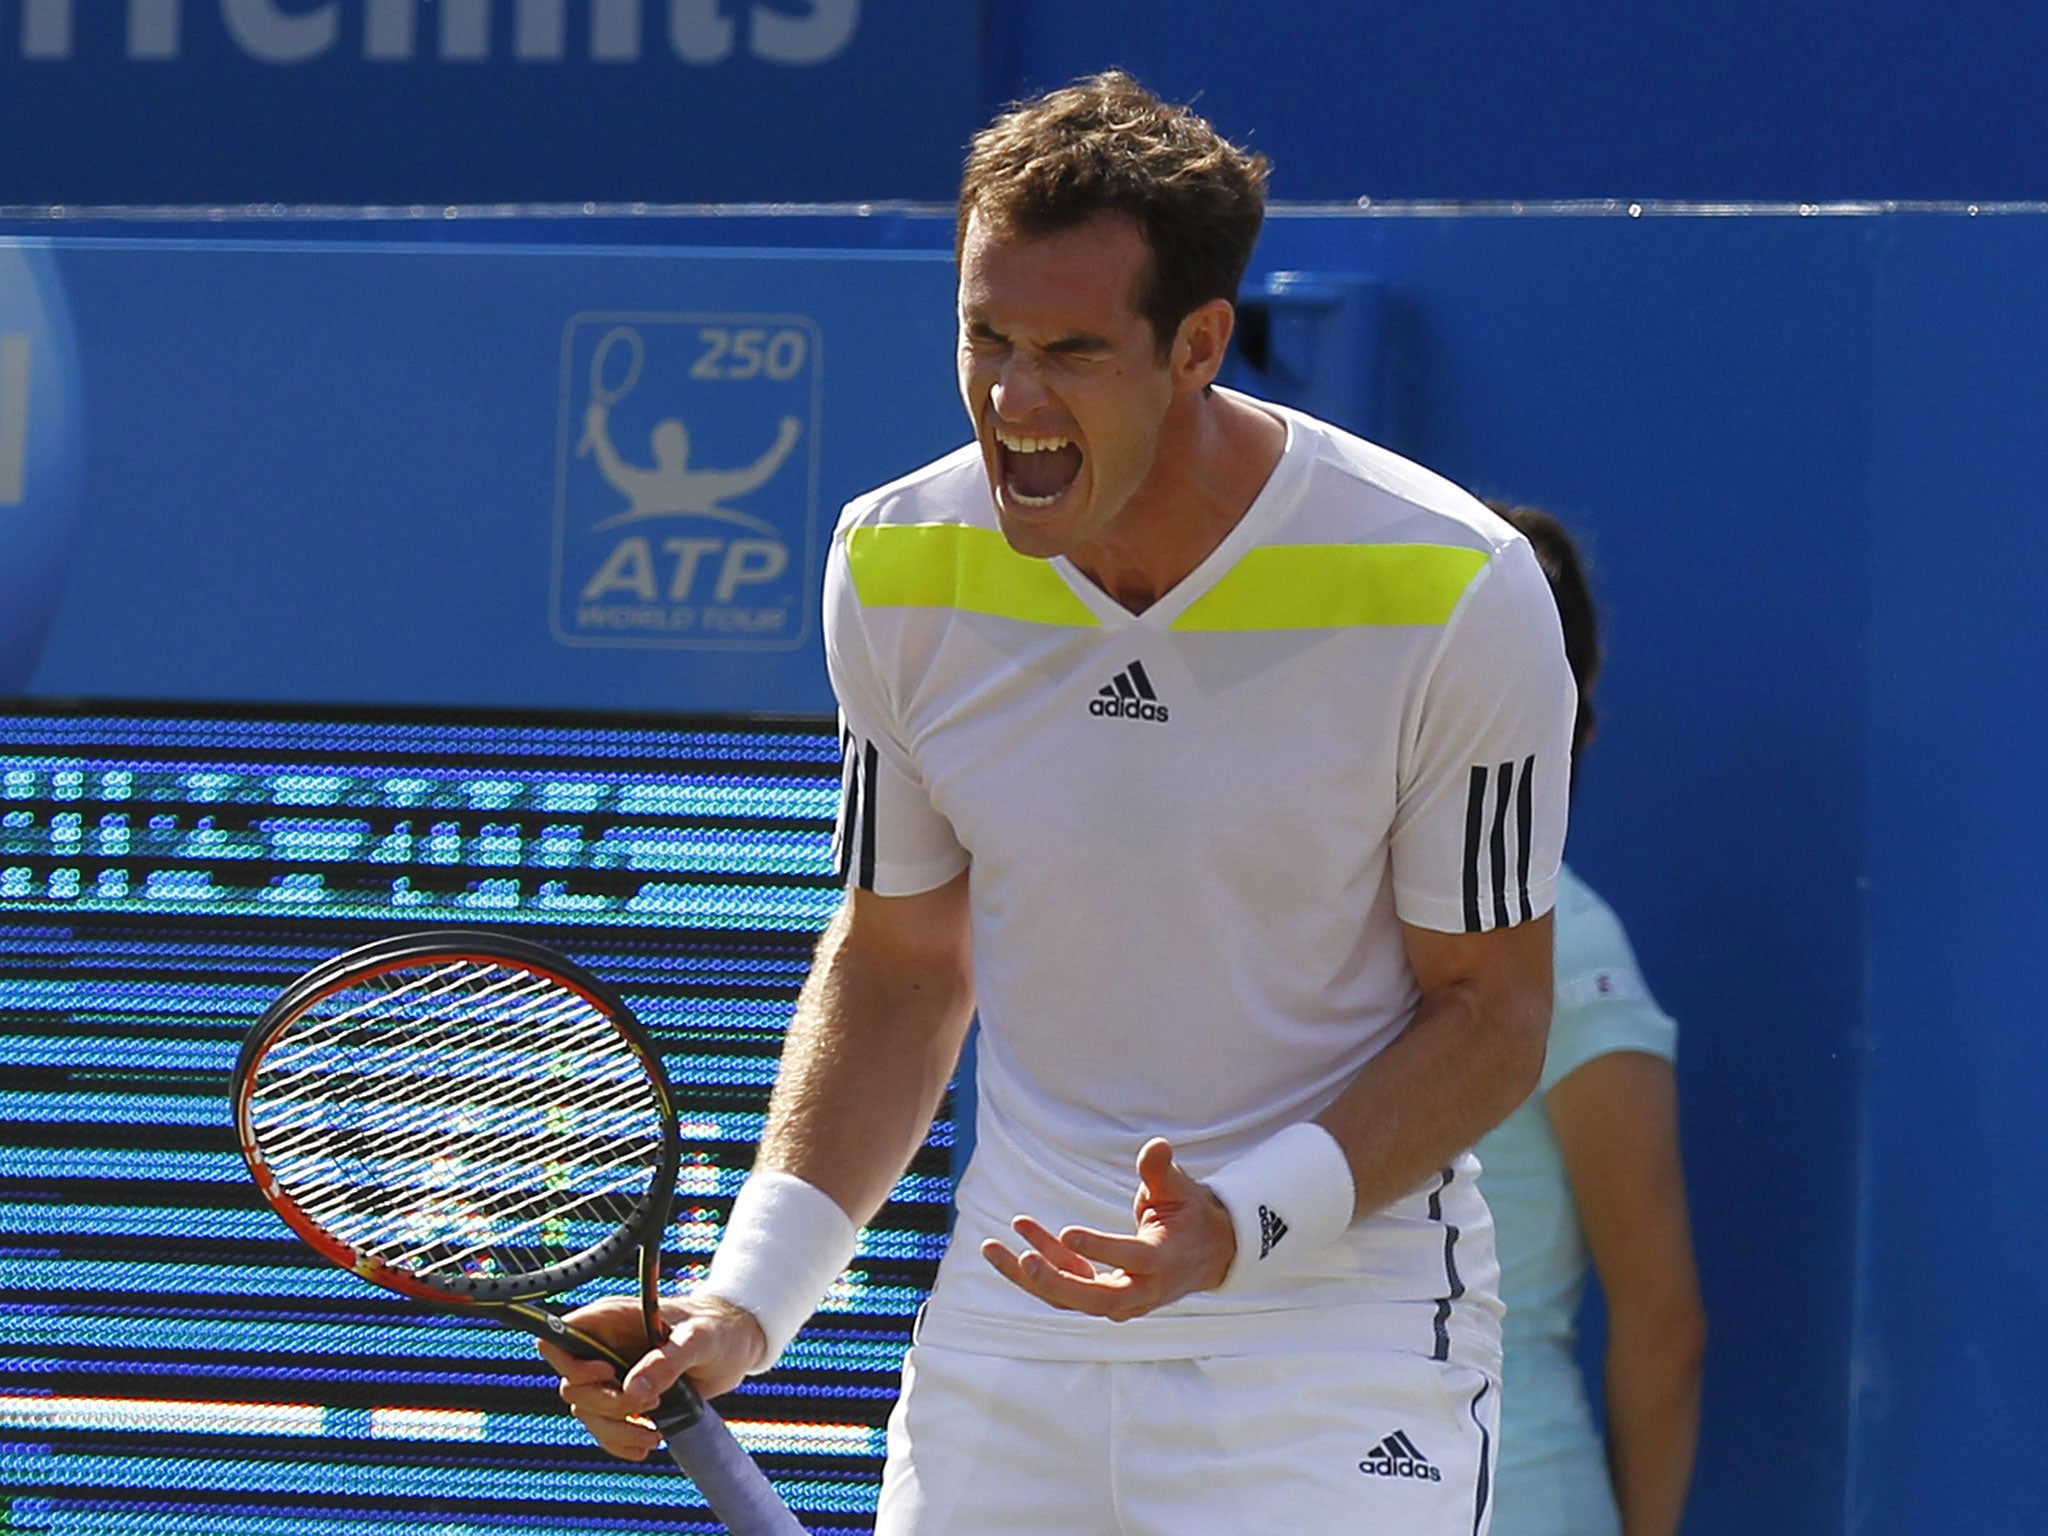 A frustrated Andy Murray on his way to defeat against Radek Stepanek at Queen’s
yesterday